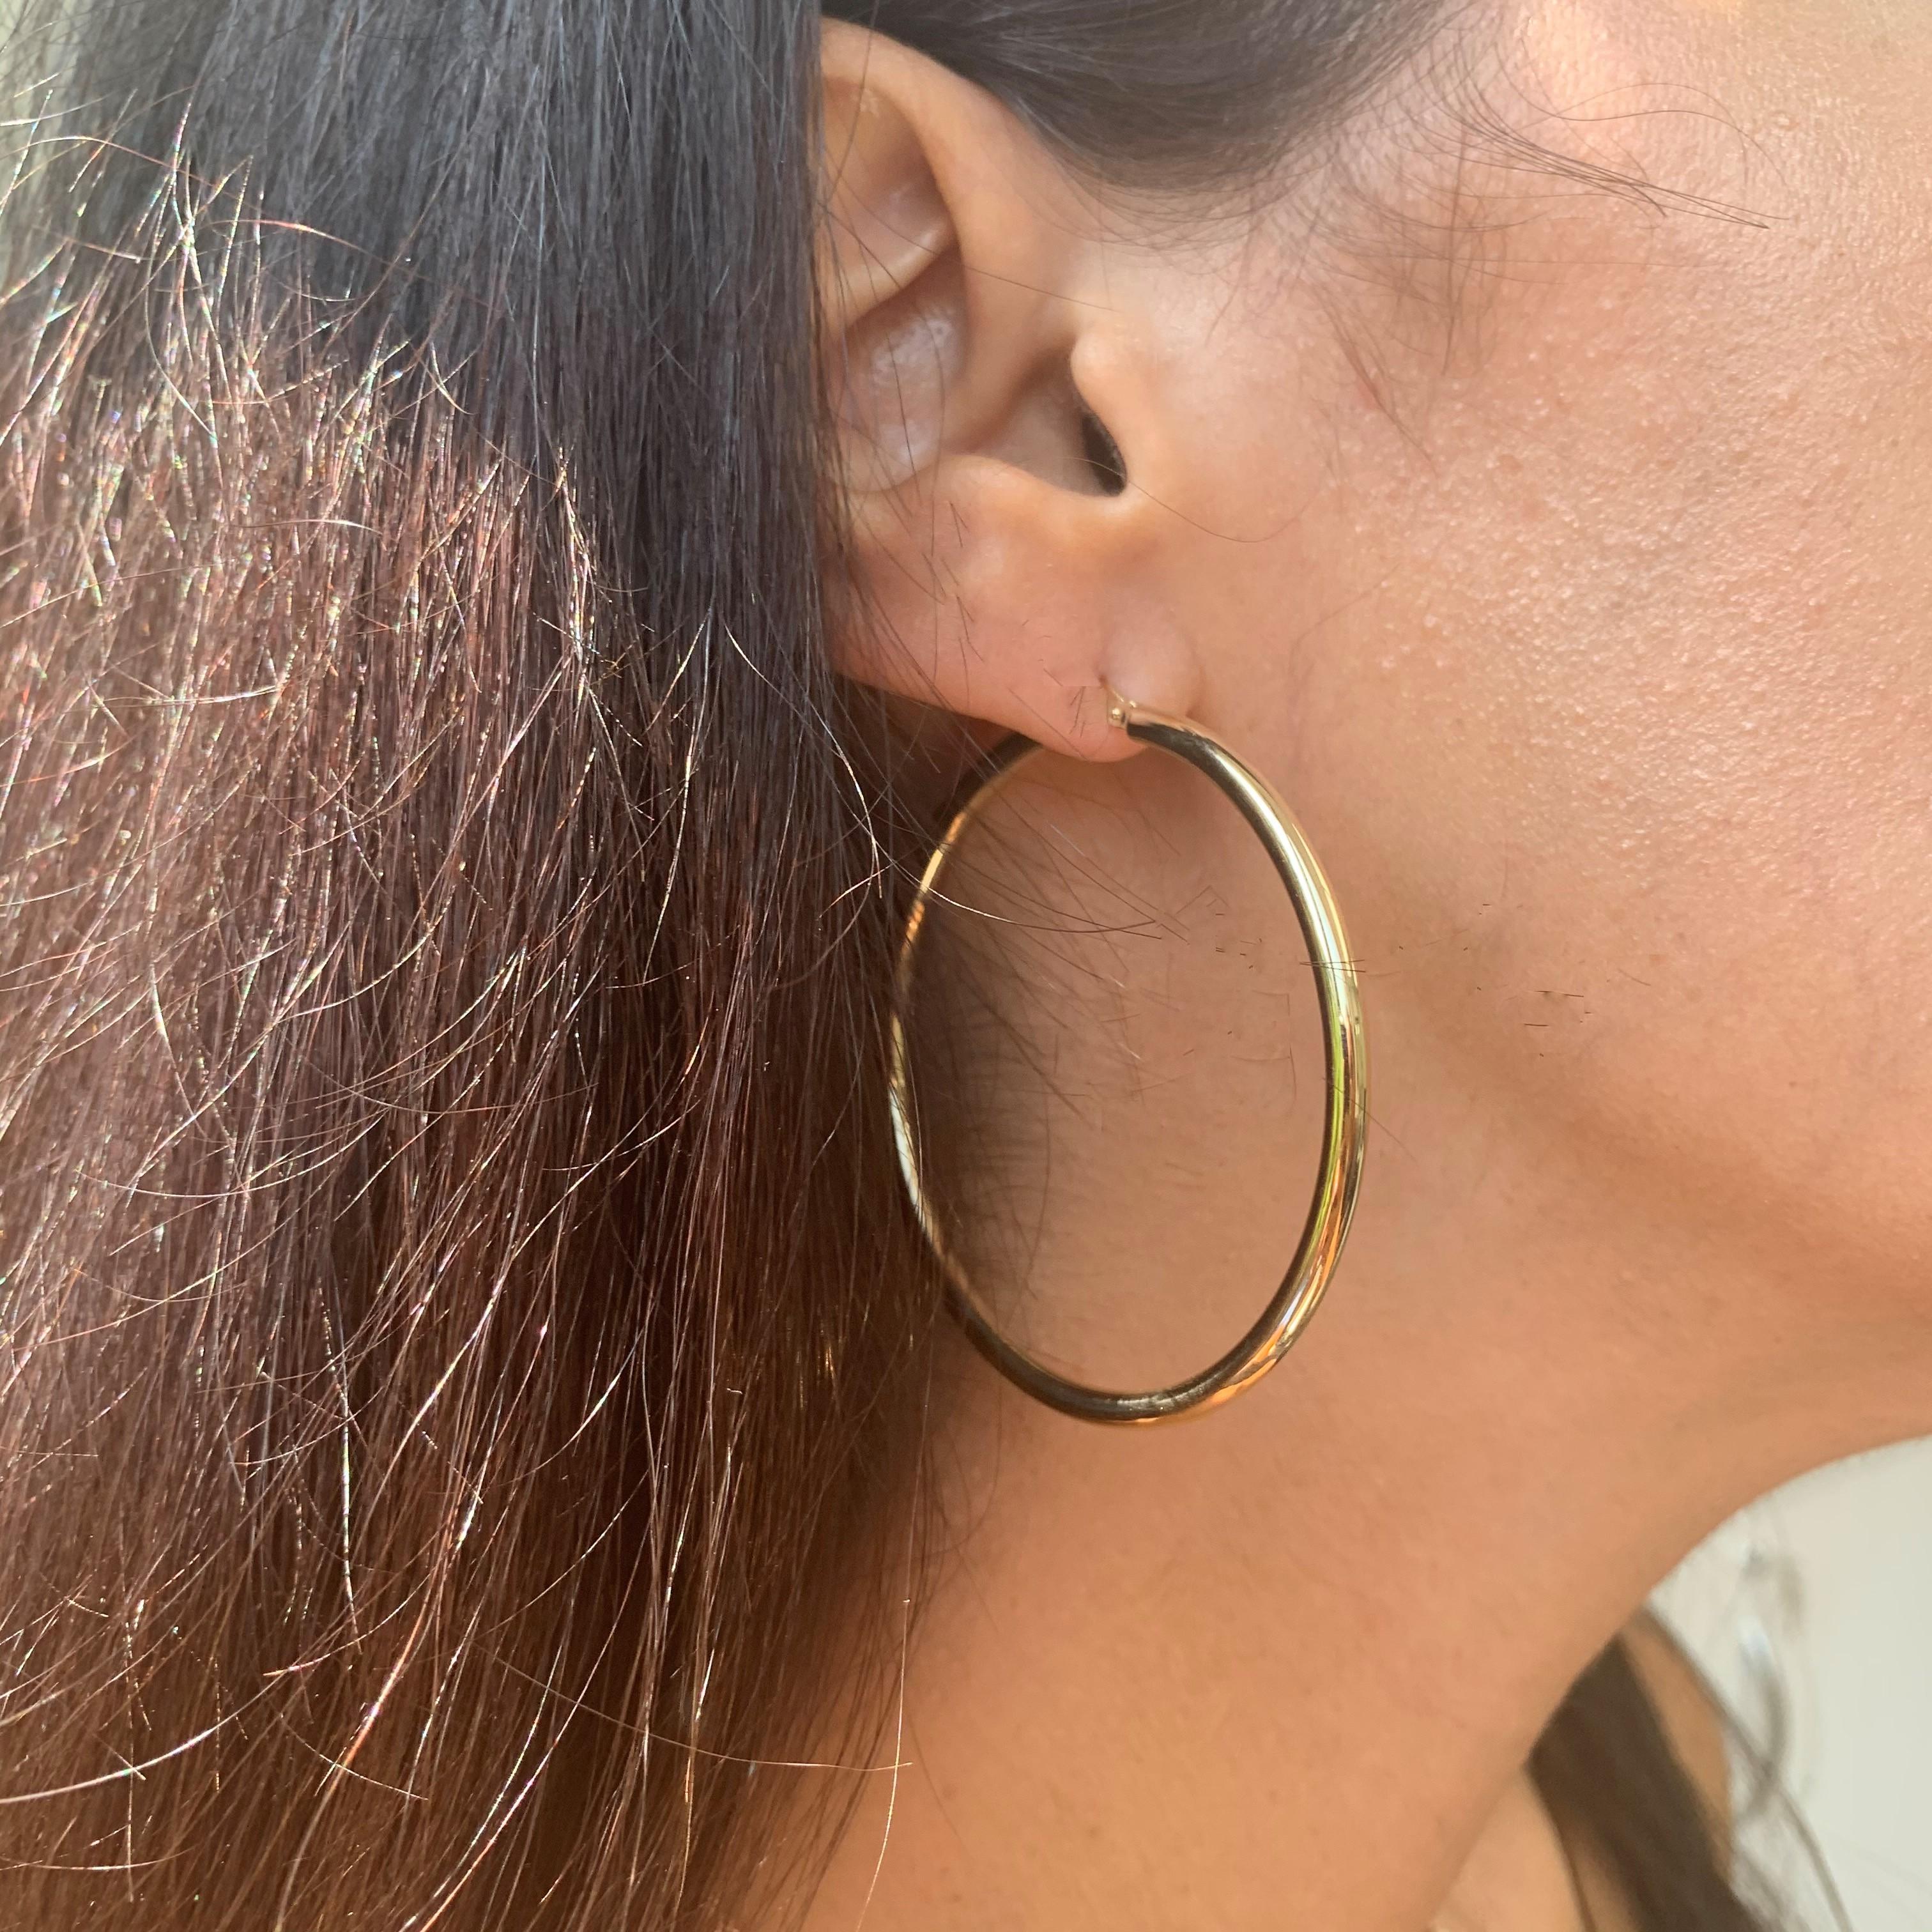 These Elegant and Stylish 14K Yellow Gold Hoop Earrings will add that perfect Glam to your look! Earring Measurements are 3 X 50 MM. 
Made in Italy
2